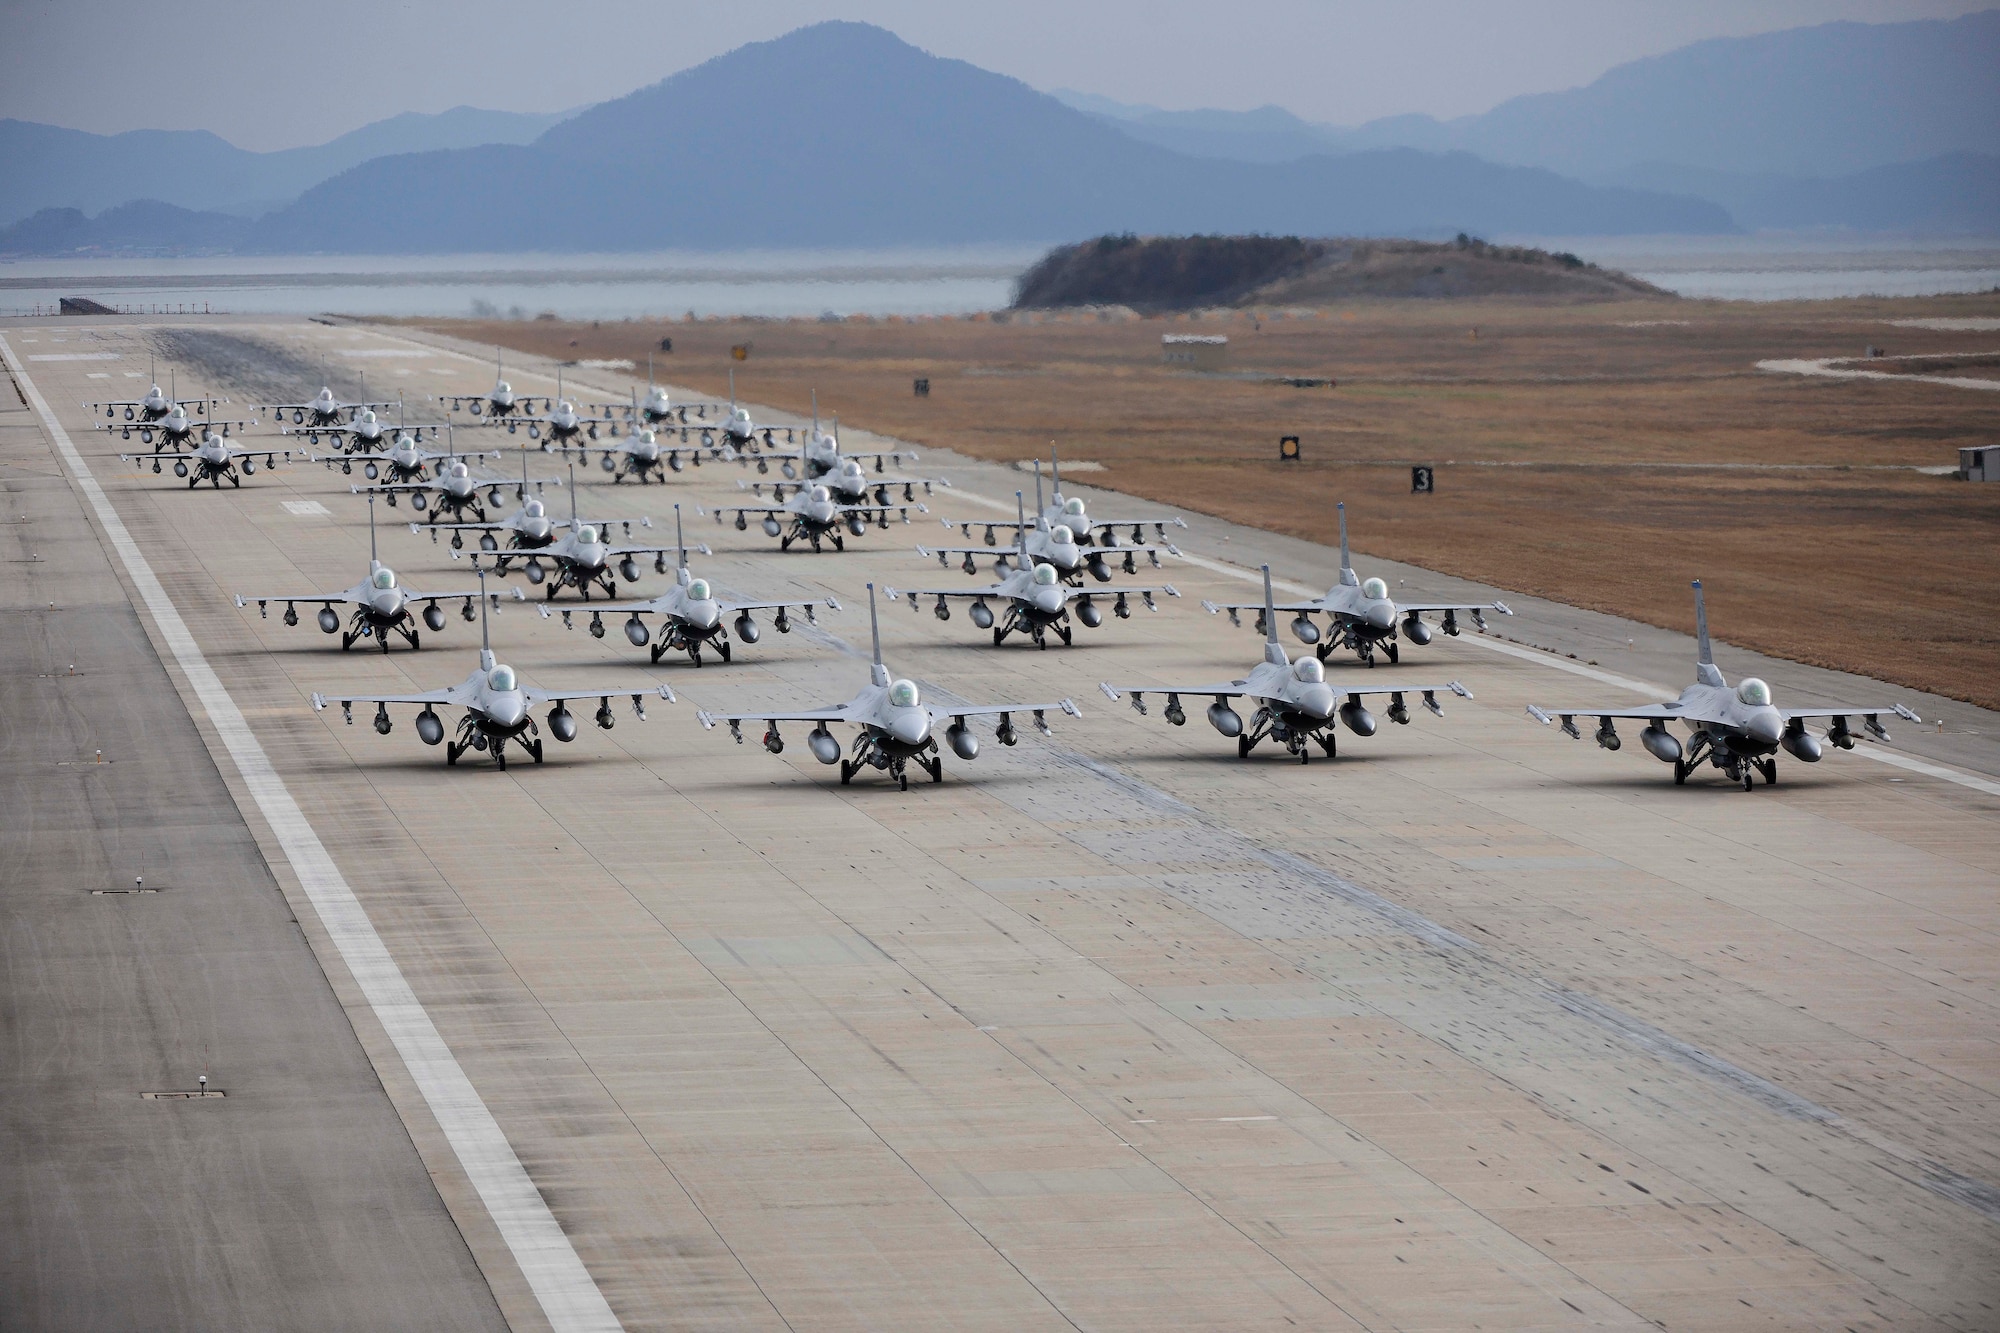 F-16 Fighting Falcons from both the 35th and 80th Fighter Squadrons of the 8th Fighter Wing, as well as from the 466th Fighter Squadron of the 419th Fighter Wing at Hill Air Force Base, Utah, demonstrate an elephant walk formation as they taxi down a runway during an exercise at Kunsan Air Base, Republic of Korea Dec. 2, 2011. The exercise showcased Kunsan AB aircrews' capability to quickly and safely prepare an aircraft for a wartime mission.  (U.S. Air Force photo by Staff Sgt. Rasheen Douglas/Released)